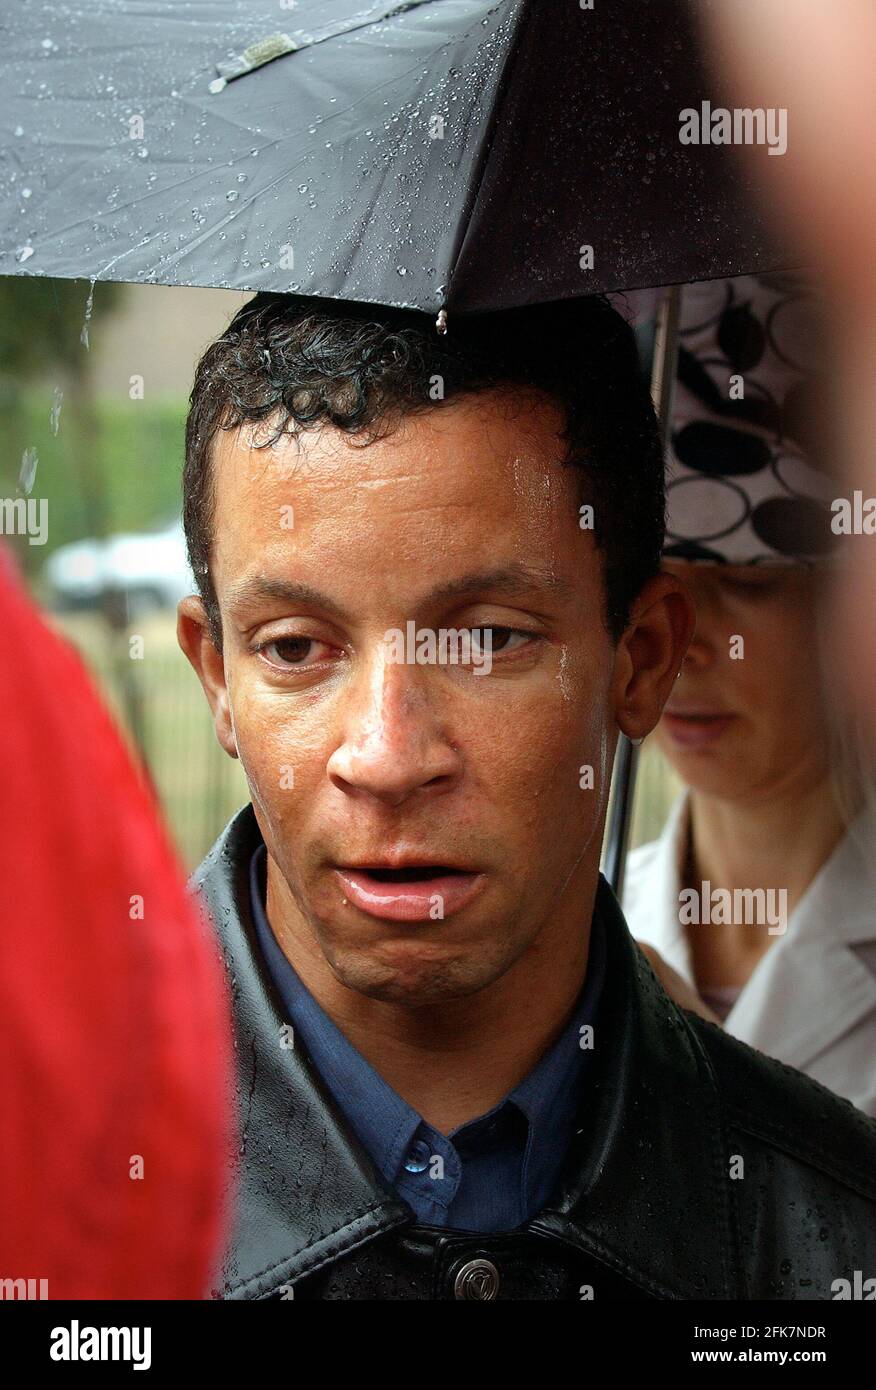 ALEX PEREIRA , COUSIN OF THE MAN SHOT BY THE POLICE AT STOCKWELL UNDERGROUND STATION,SPEAKING TO THE PRESS OUTSIDE THE DEAD MANS HOUSE IN TULSE HILL.24/7/05 TOM PILSTON Stock Photo